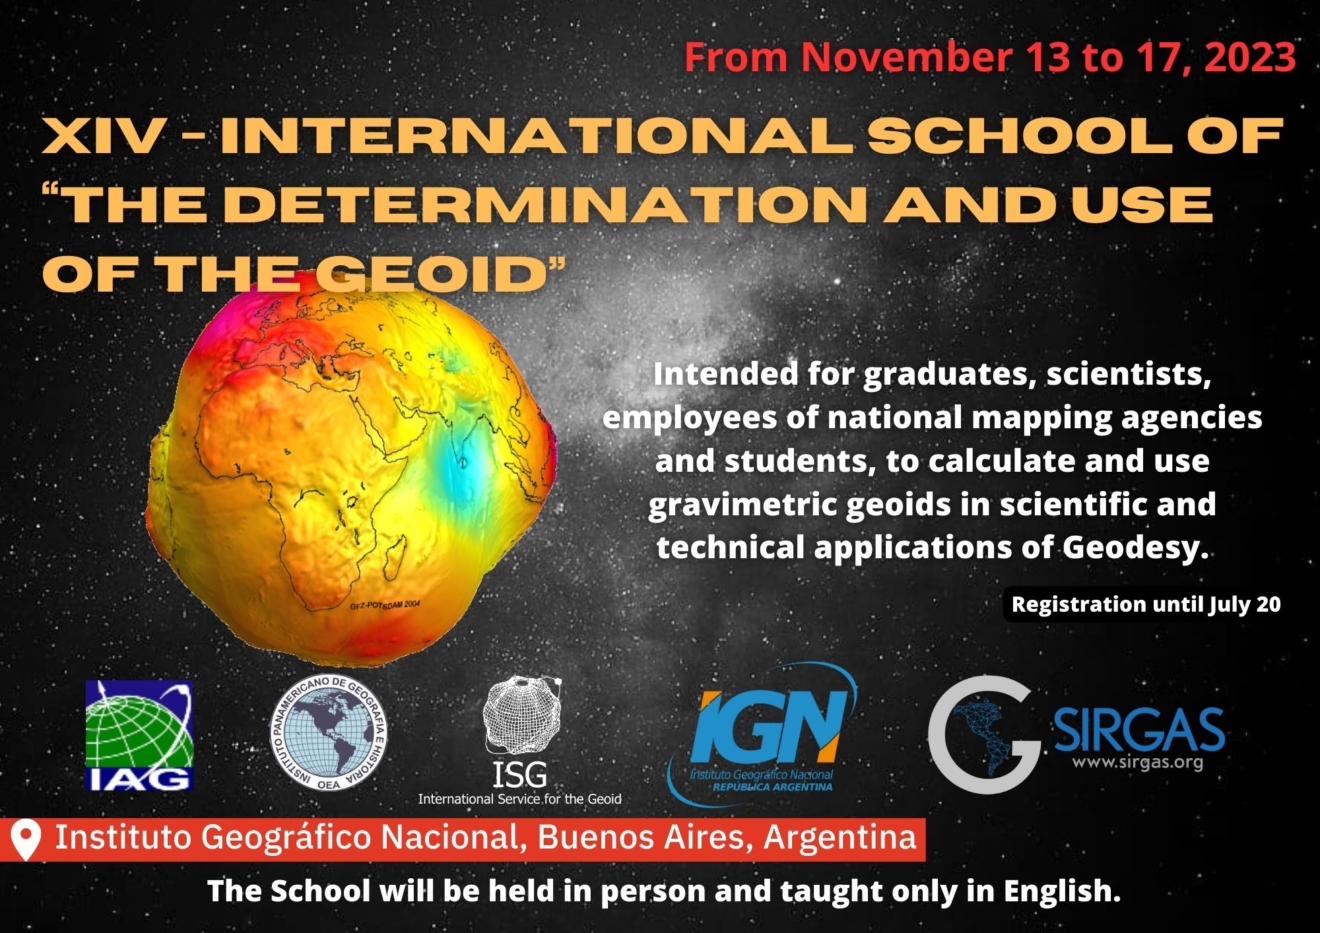 School on “The Determination and Use of the Geoid＂